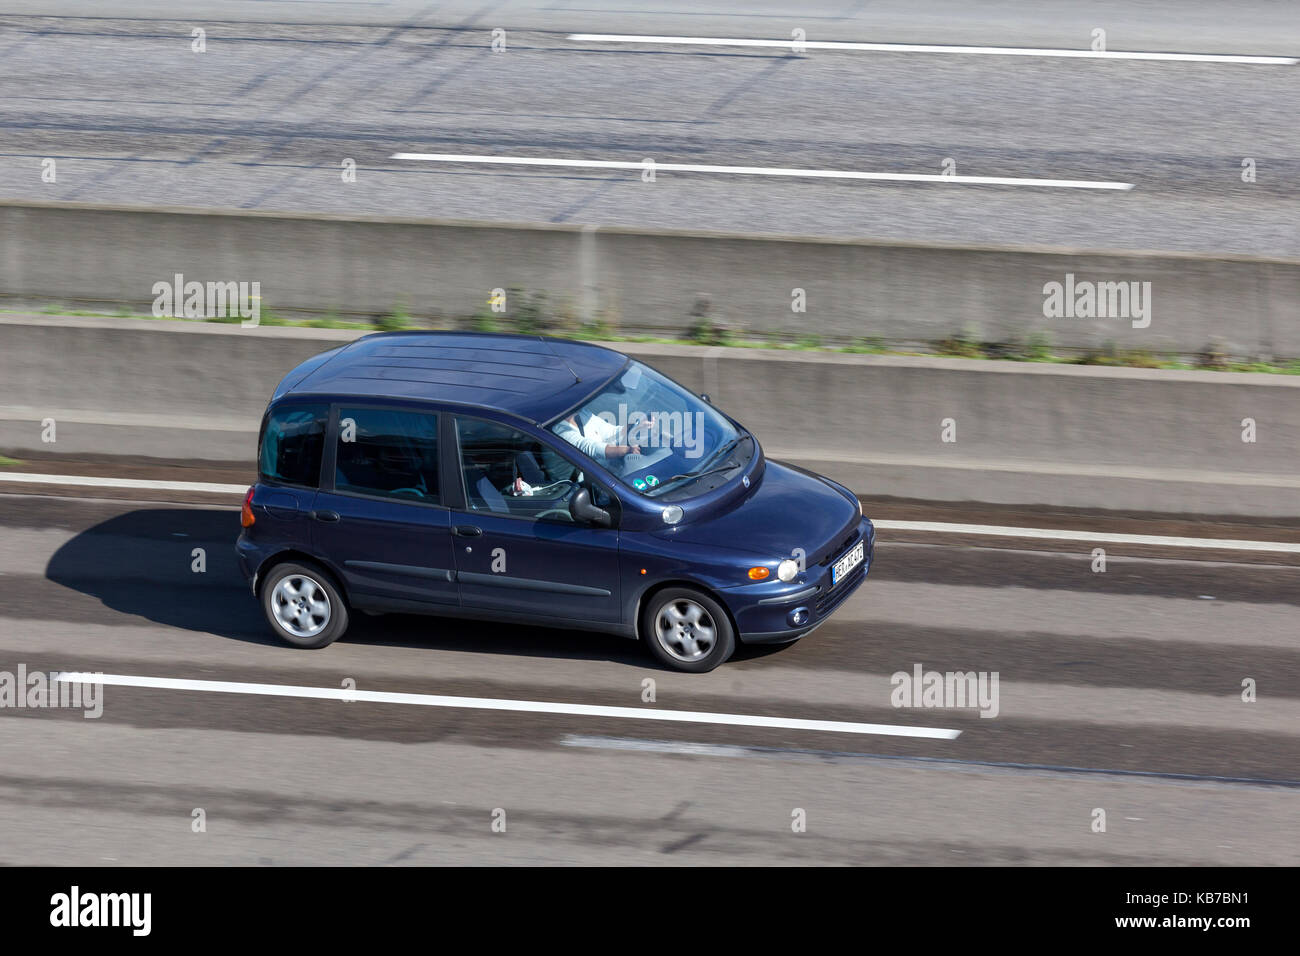 Frankfurt, Germany - Sep 19, 2017: Compact italian MPV Fiat Multipla driving on the highway in Germany Stock Photo